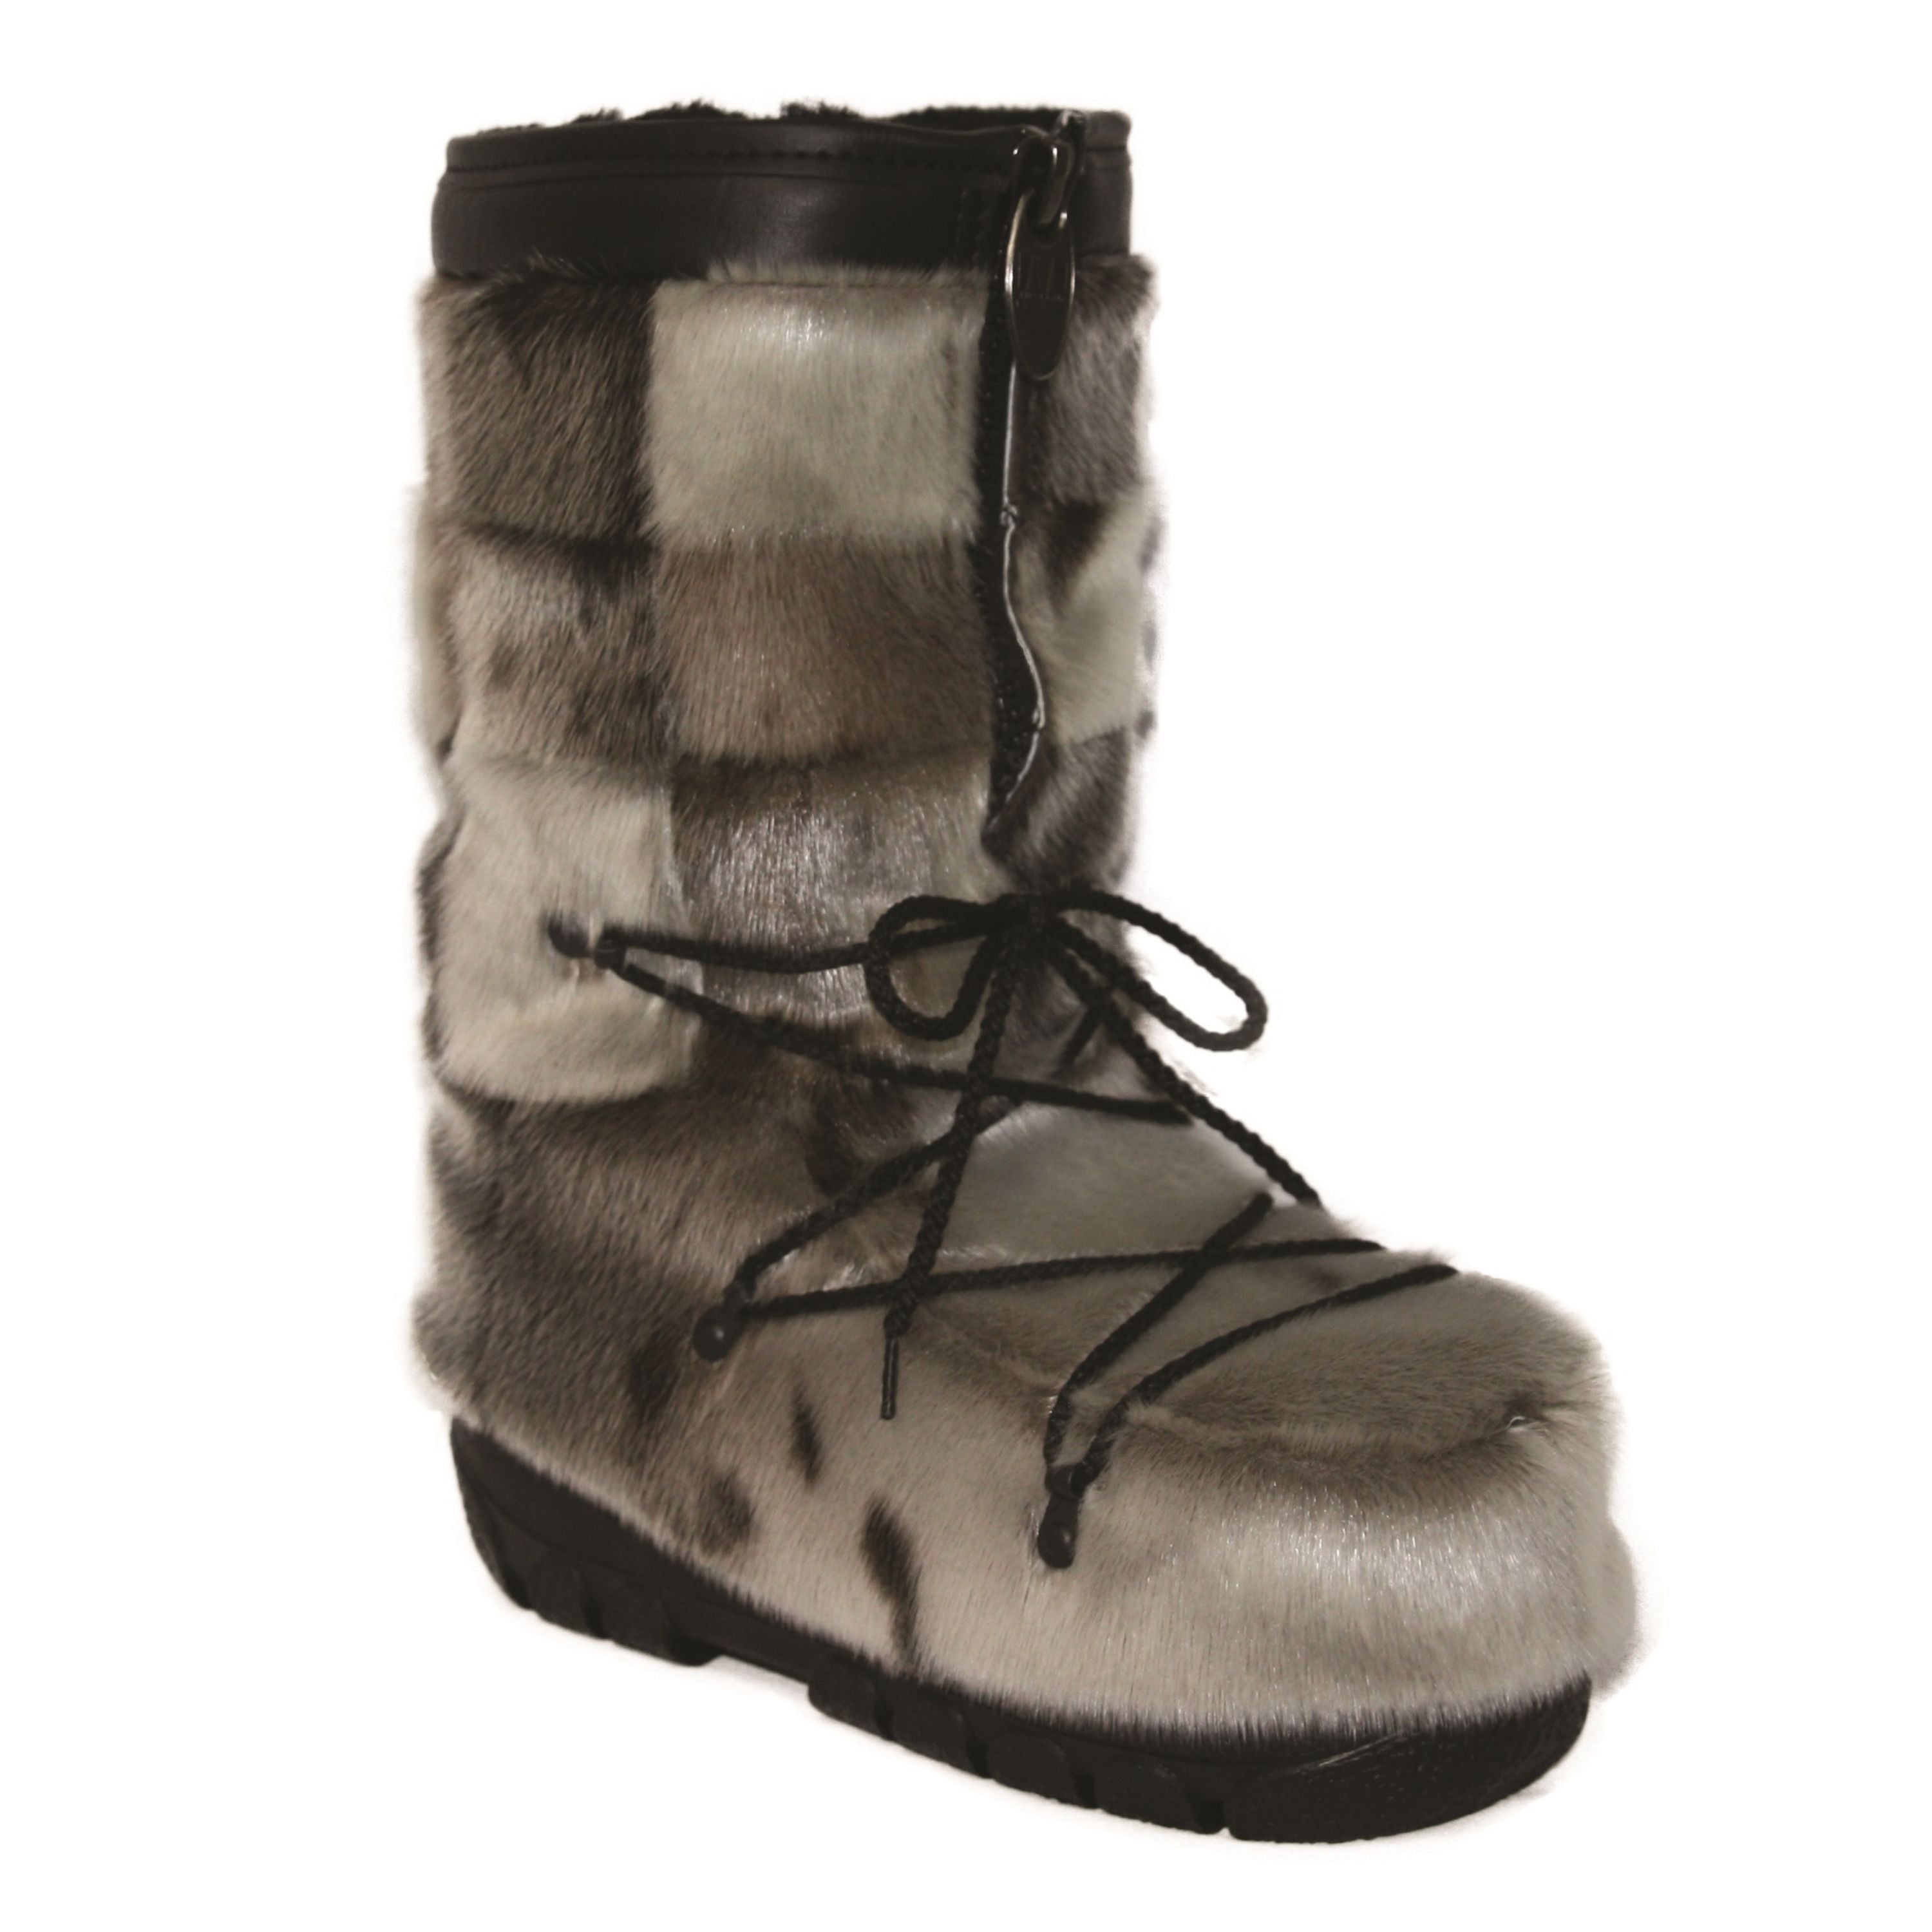 "checked style" Seal fur boots - Men's